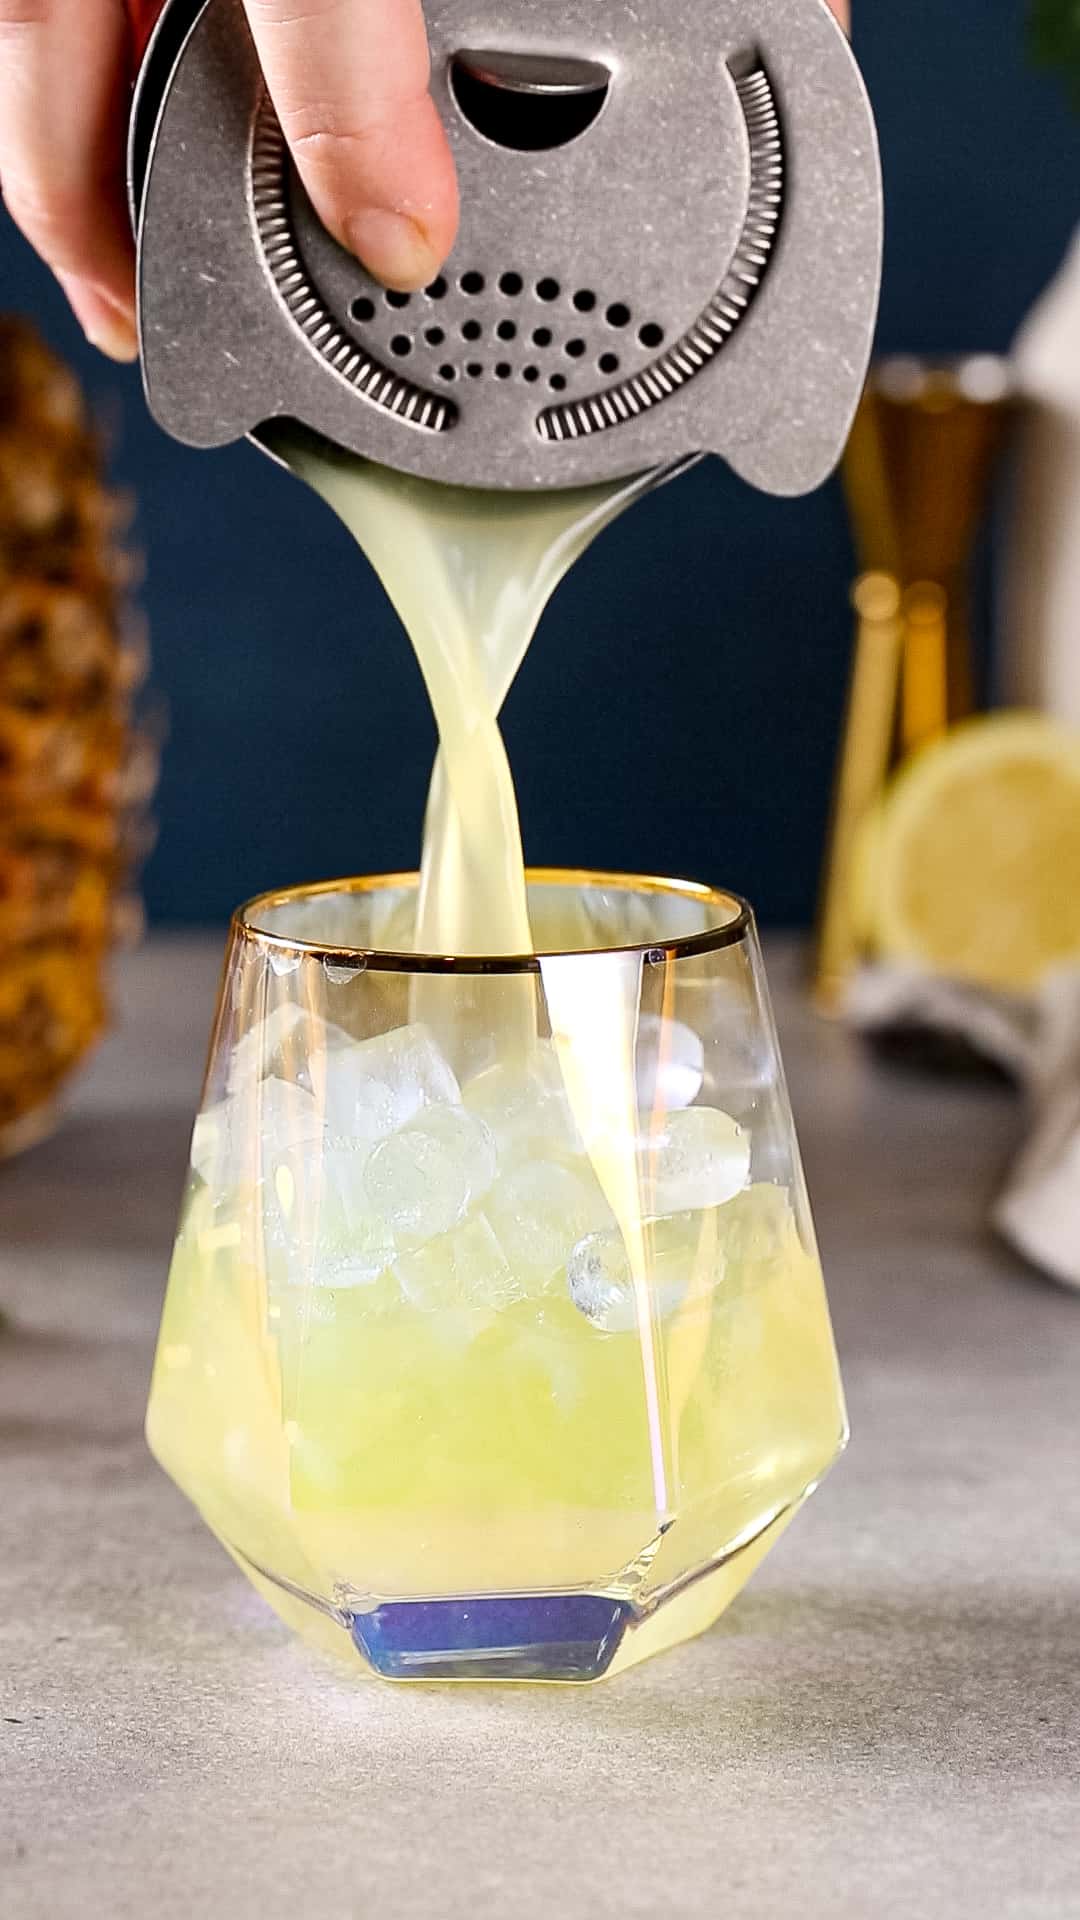 Hand using a cocktail shaker to strain a yellow drink into a serving glass.